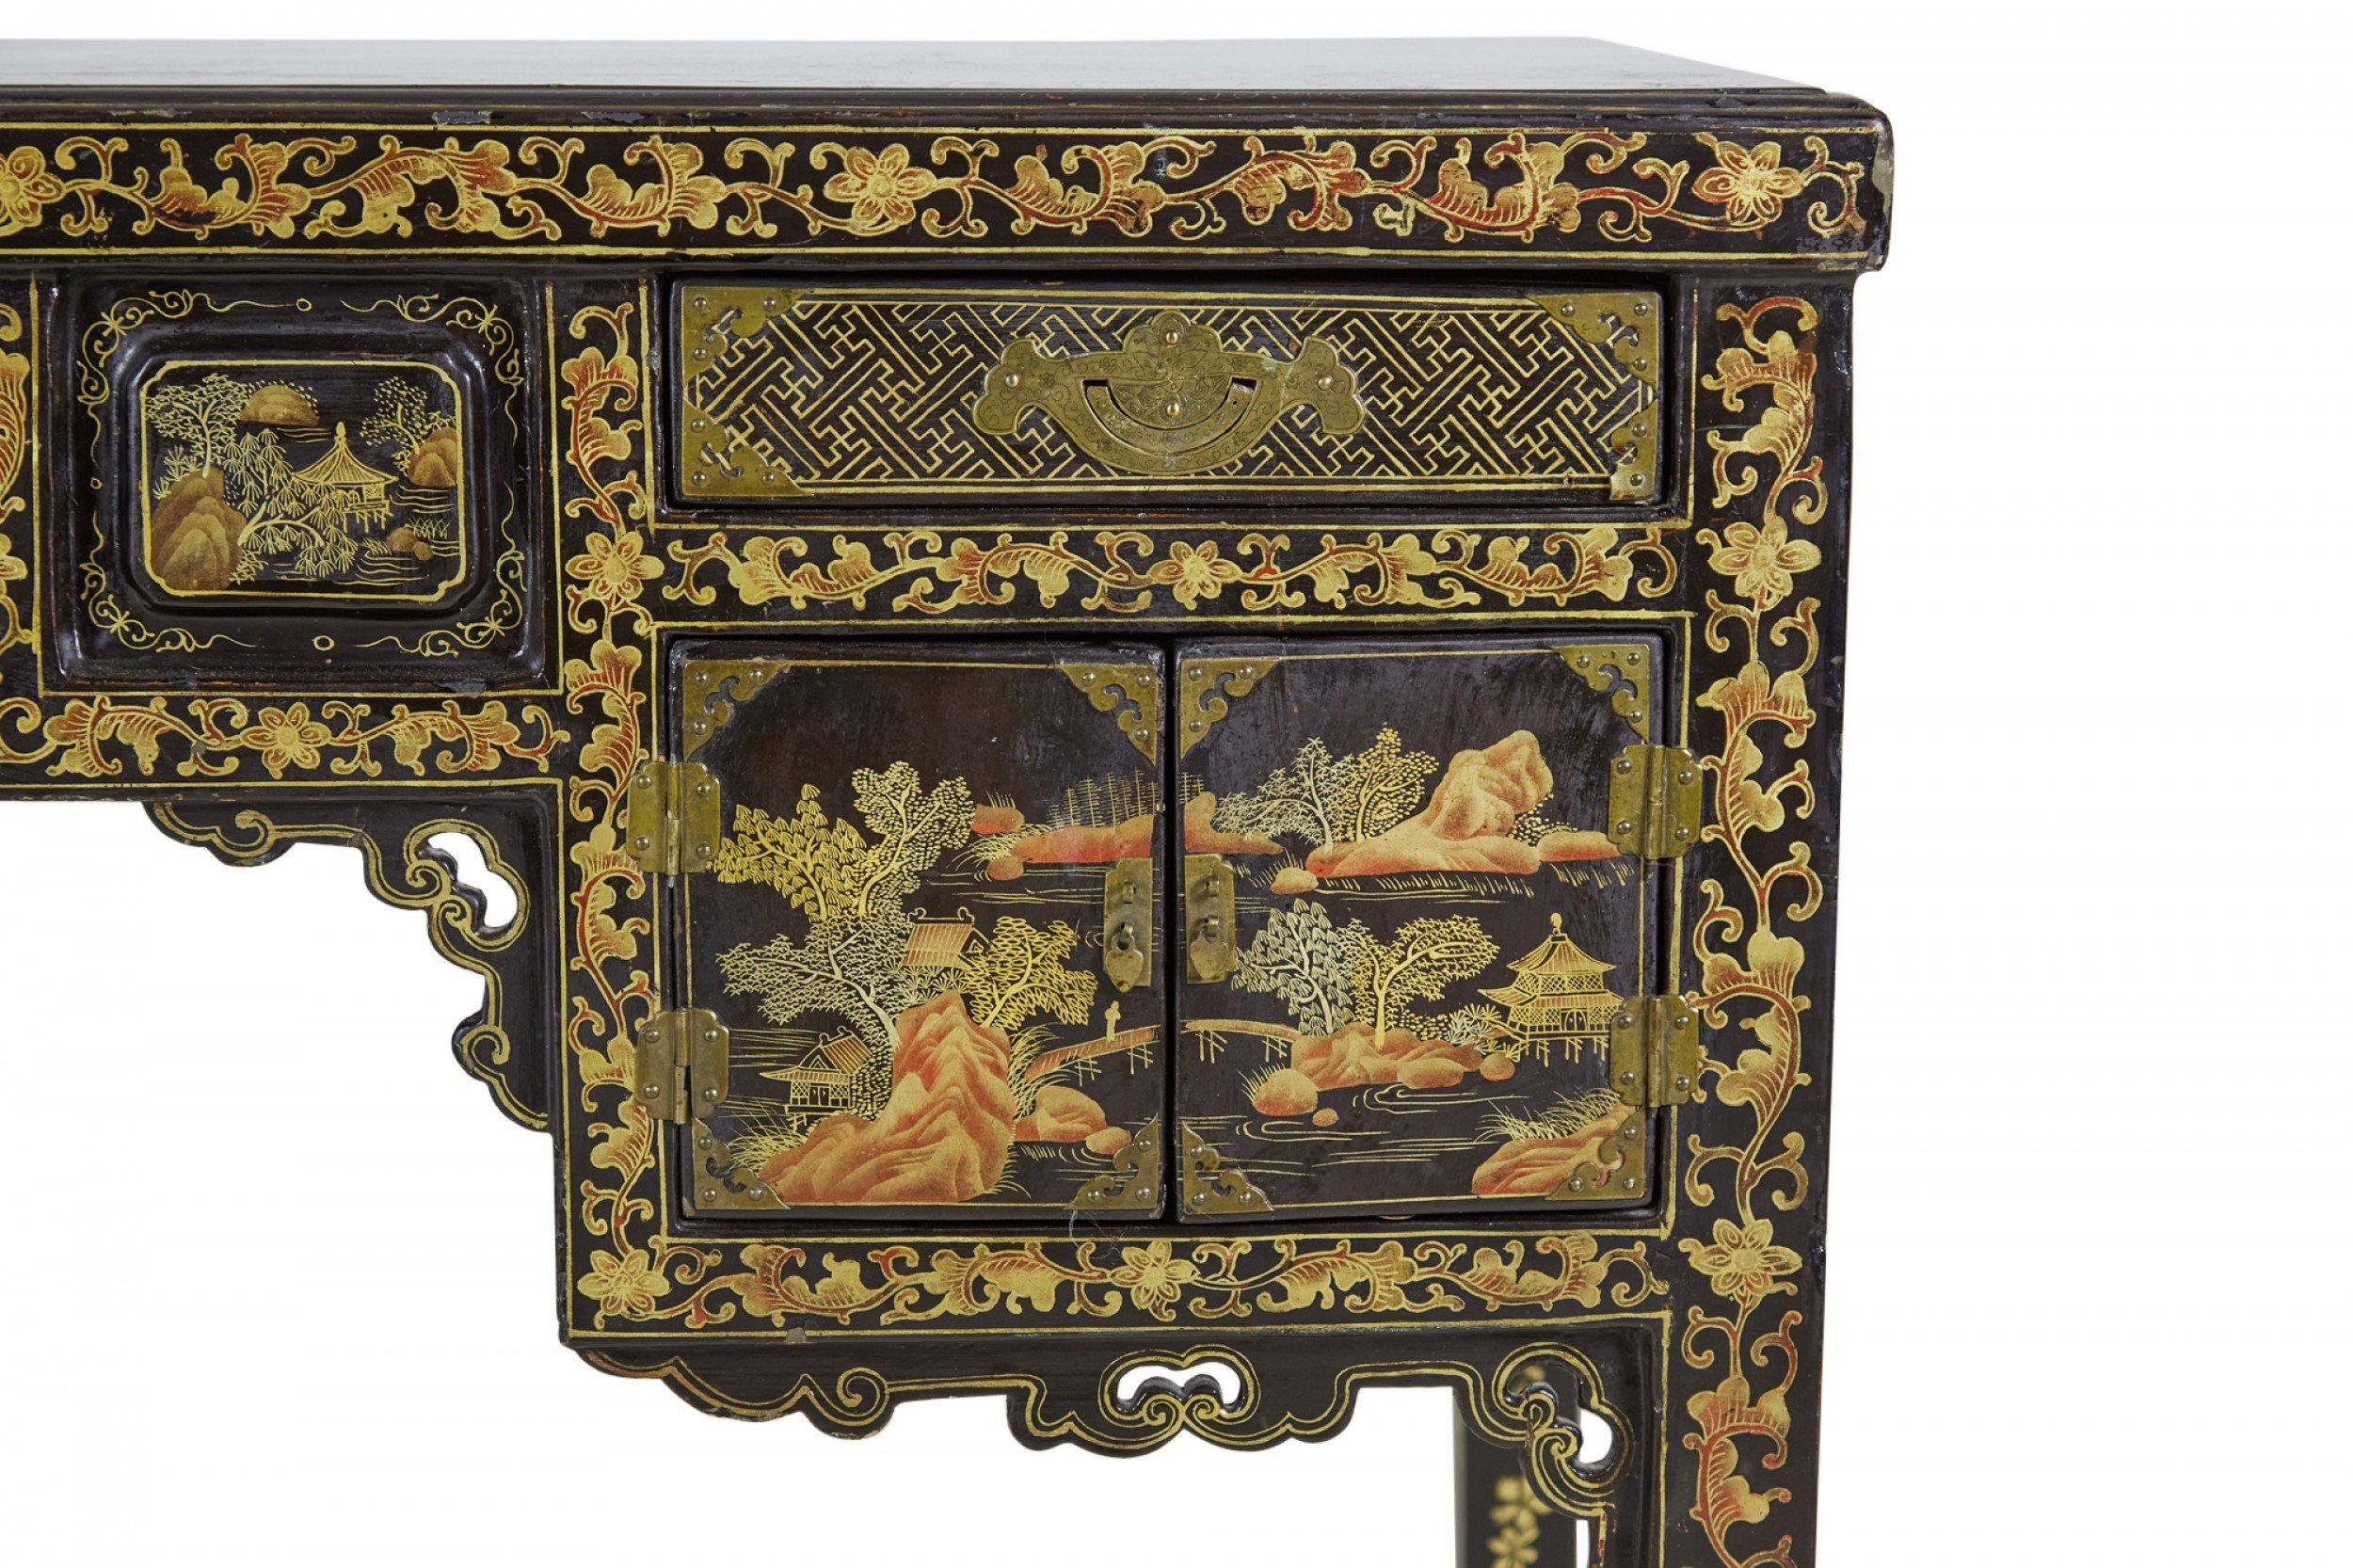 19th Century English Regency Chinese Export Gilt Black Lacquer Desk For Sale 8